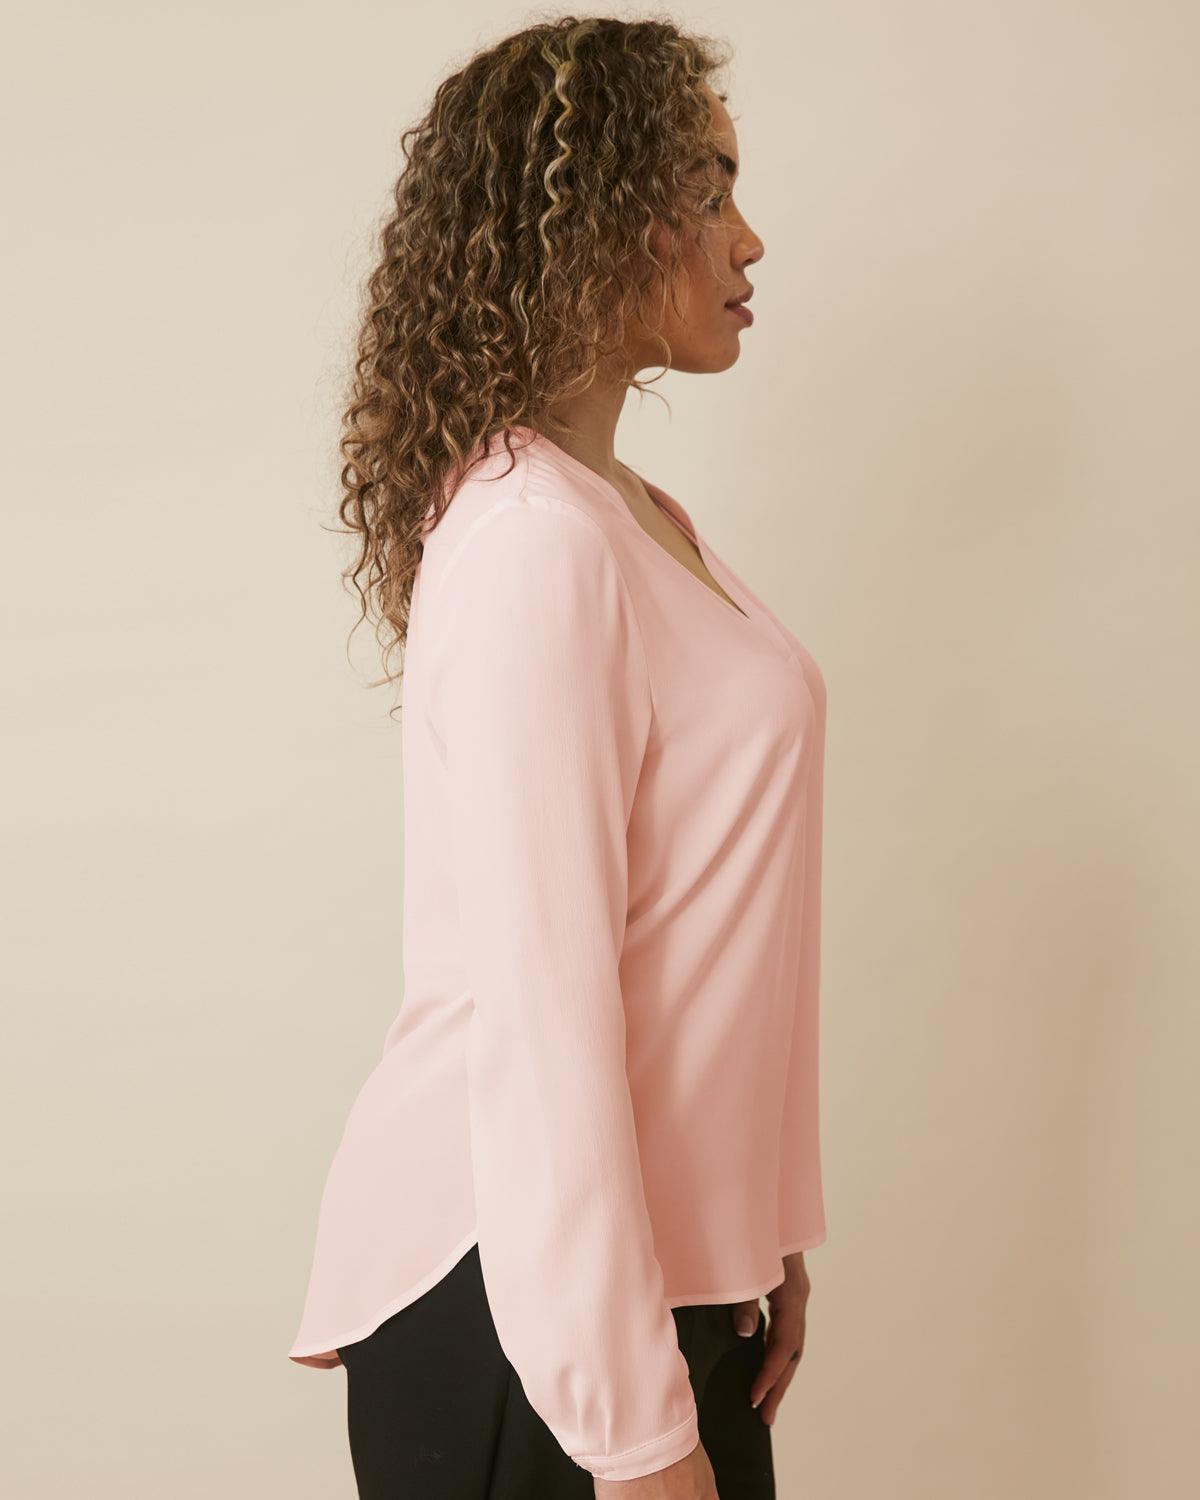 "#color_PINK|Zoe is 5'8", wearing a size M